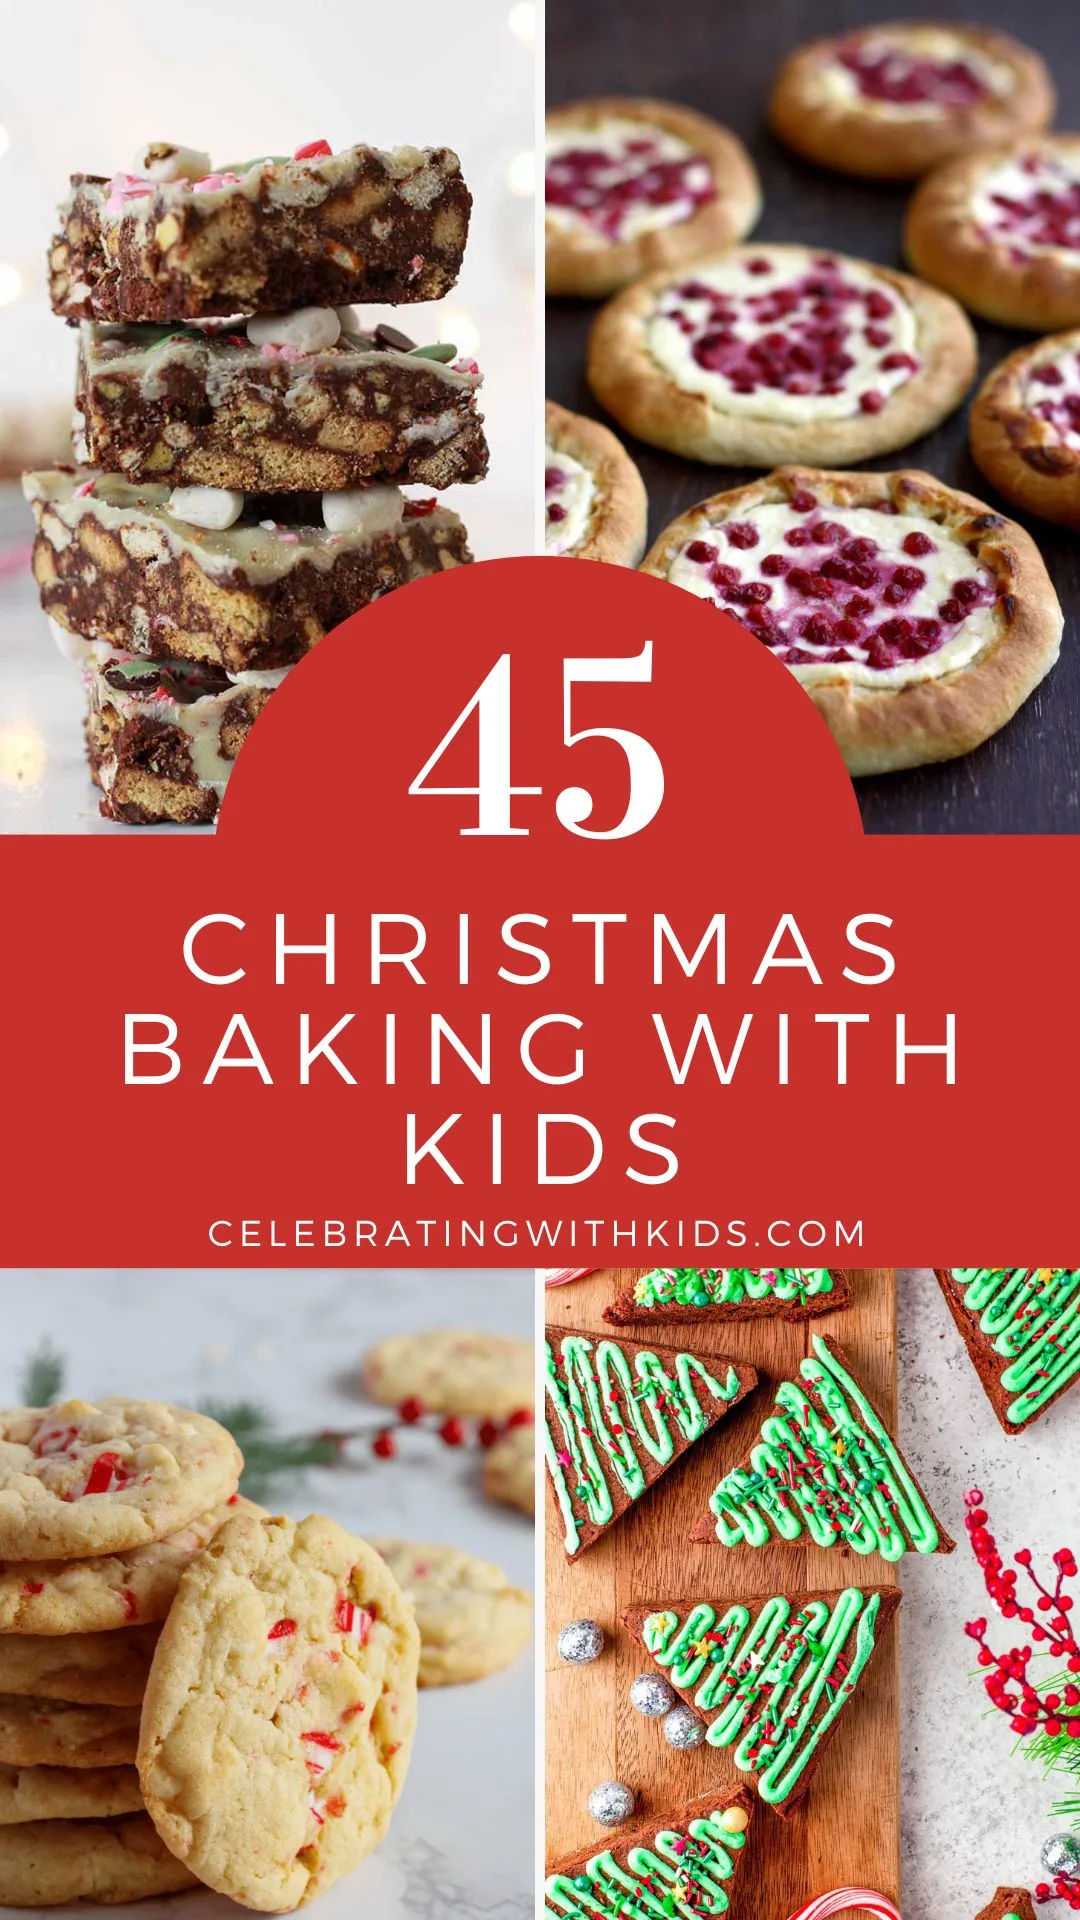 45 Christmas Baking with Kids ideas - Celebrating with kids